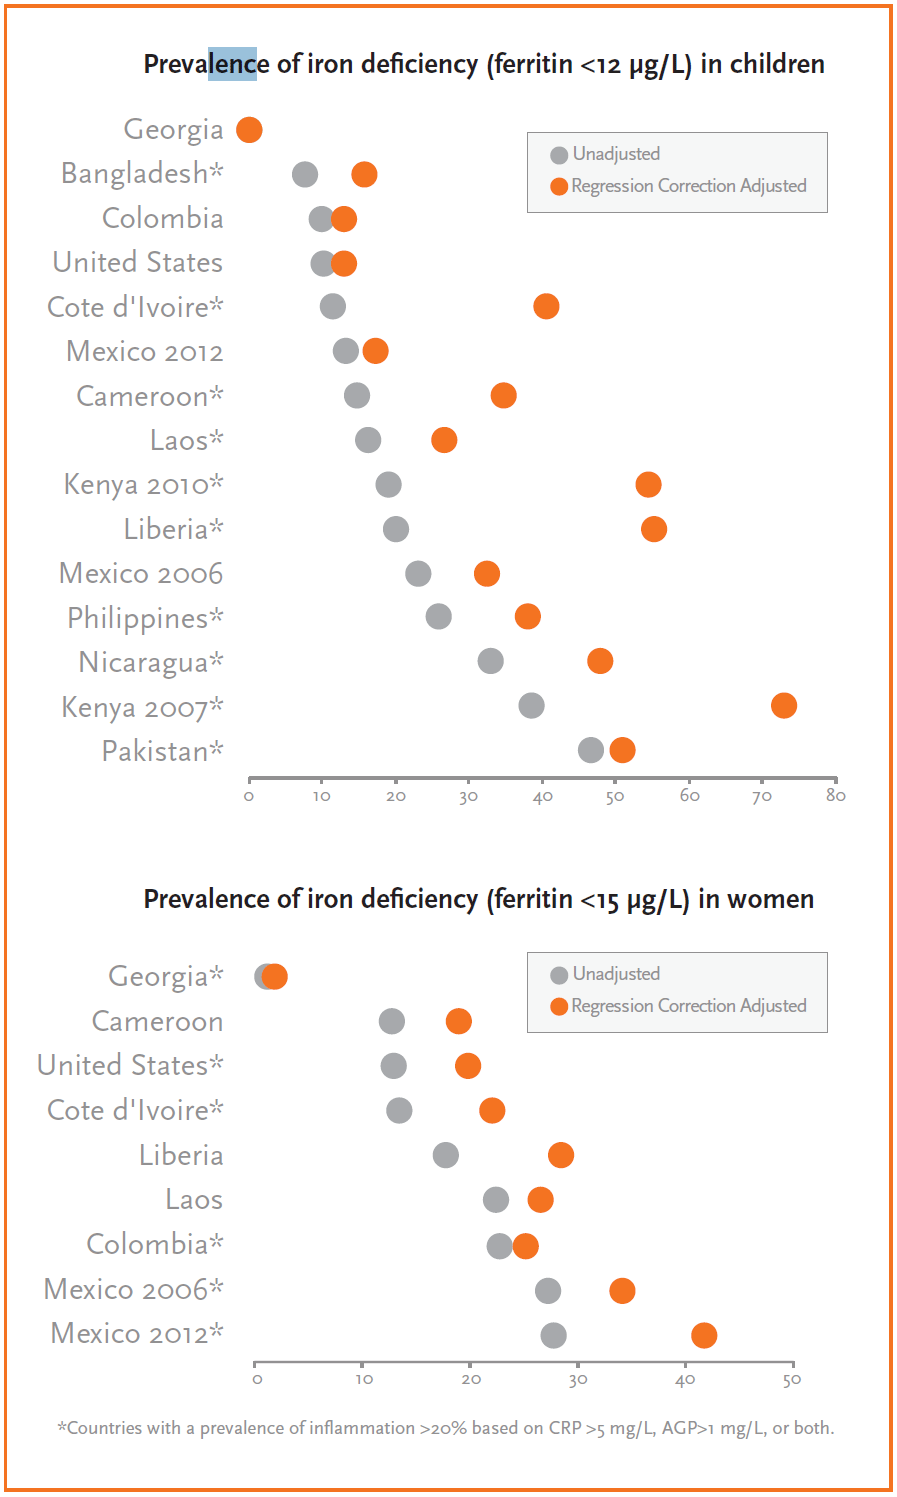 Two graphs titled "Figure 2. Adjustments for Inflammation Make a Big Difference." The top graph is subtitled "Prevalence of iron deficiency(ferritin <12 µg/L) in children" and shows that the unadjusted rates from lowest to highest are as follows: Georgia, Bangladesh, Columbia, United States, Cote d'Ivoire, Mesico (2012), Cameroon, Laos, Kenya (2010), Liberia, Mexico (2006), Philippines, Nicaragua, Kenya (2007), and Pakistan, with the range going from about 20% to 48%. Regression correction adjusted figures show the highest rates for Kenya (2007) at about 74%, Liberia at about 56%, and Kenya (2010) at about 54%.<br />
The bottom graph is subtitled "Prevalence of iron deficiency (ferritin <15 µg/L) in women" and shows the following from lowest to highest: Georgia, Cameroon, United States, Cote d'Ivoire, Liberia, colombia, Mexico 2006, Mexico 2012, with the highest regression adjusted rate being for Mexico 2012 at about 42%.